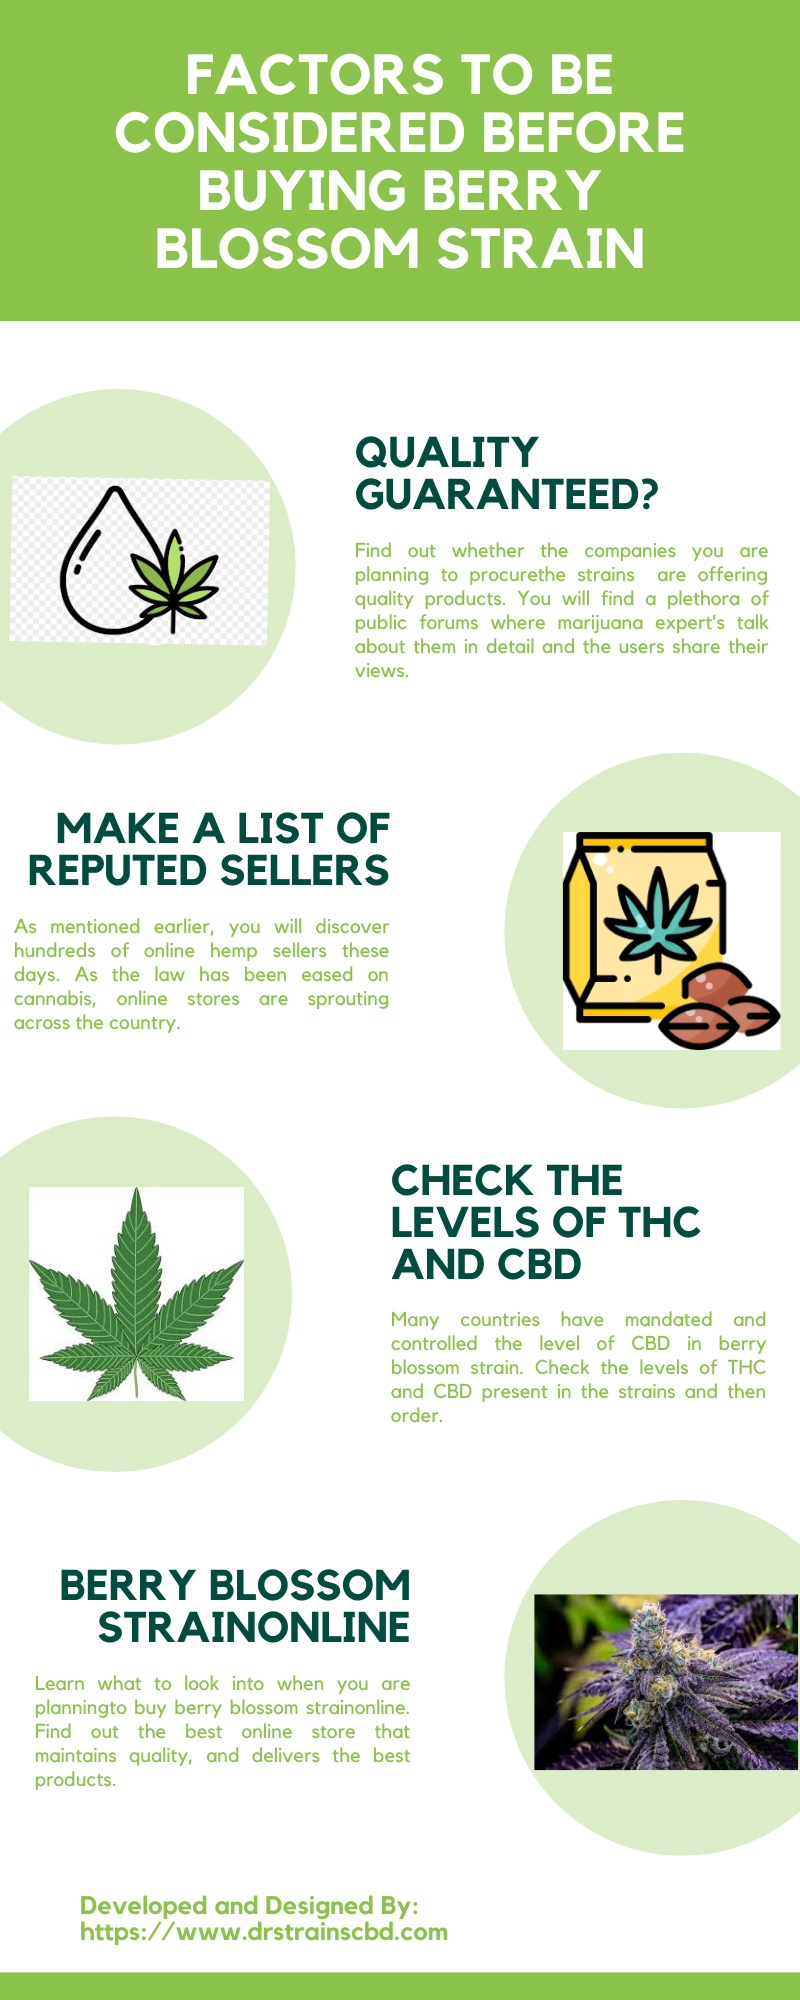 Factors to Be Considered before Buying Berry Blossom Strain.png  by drstrainscbd